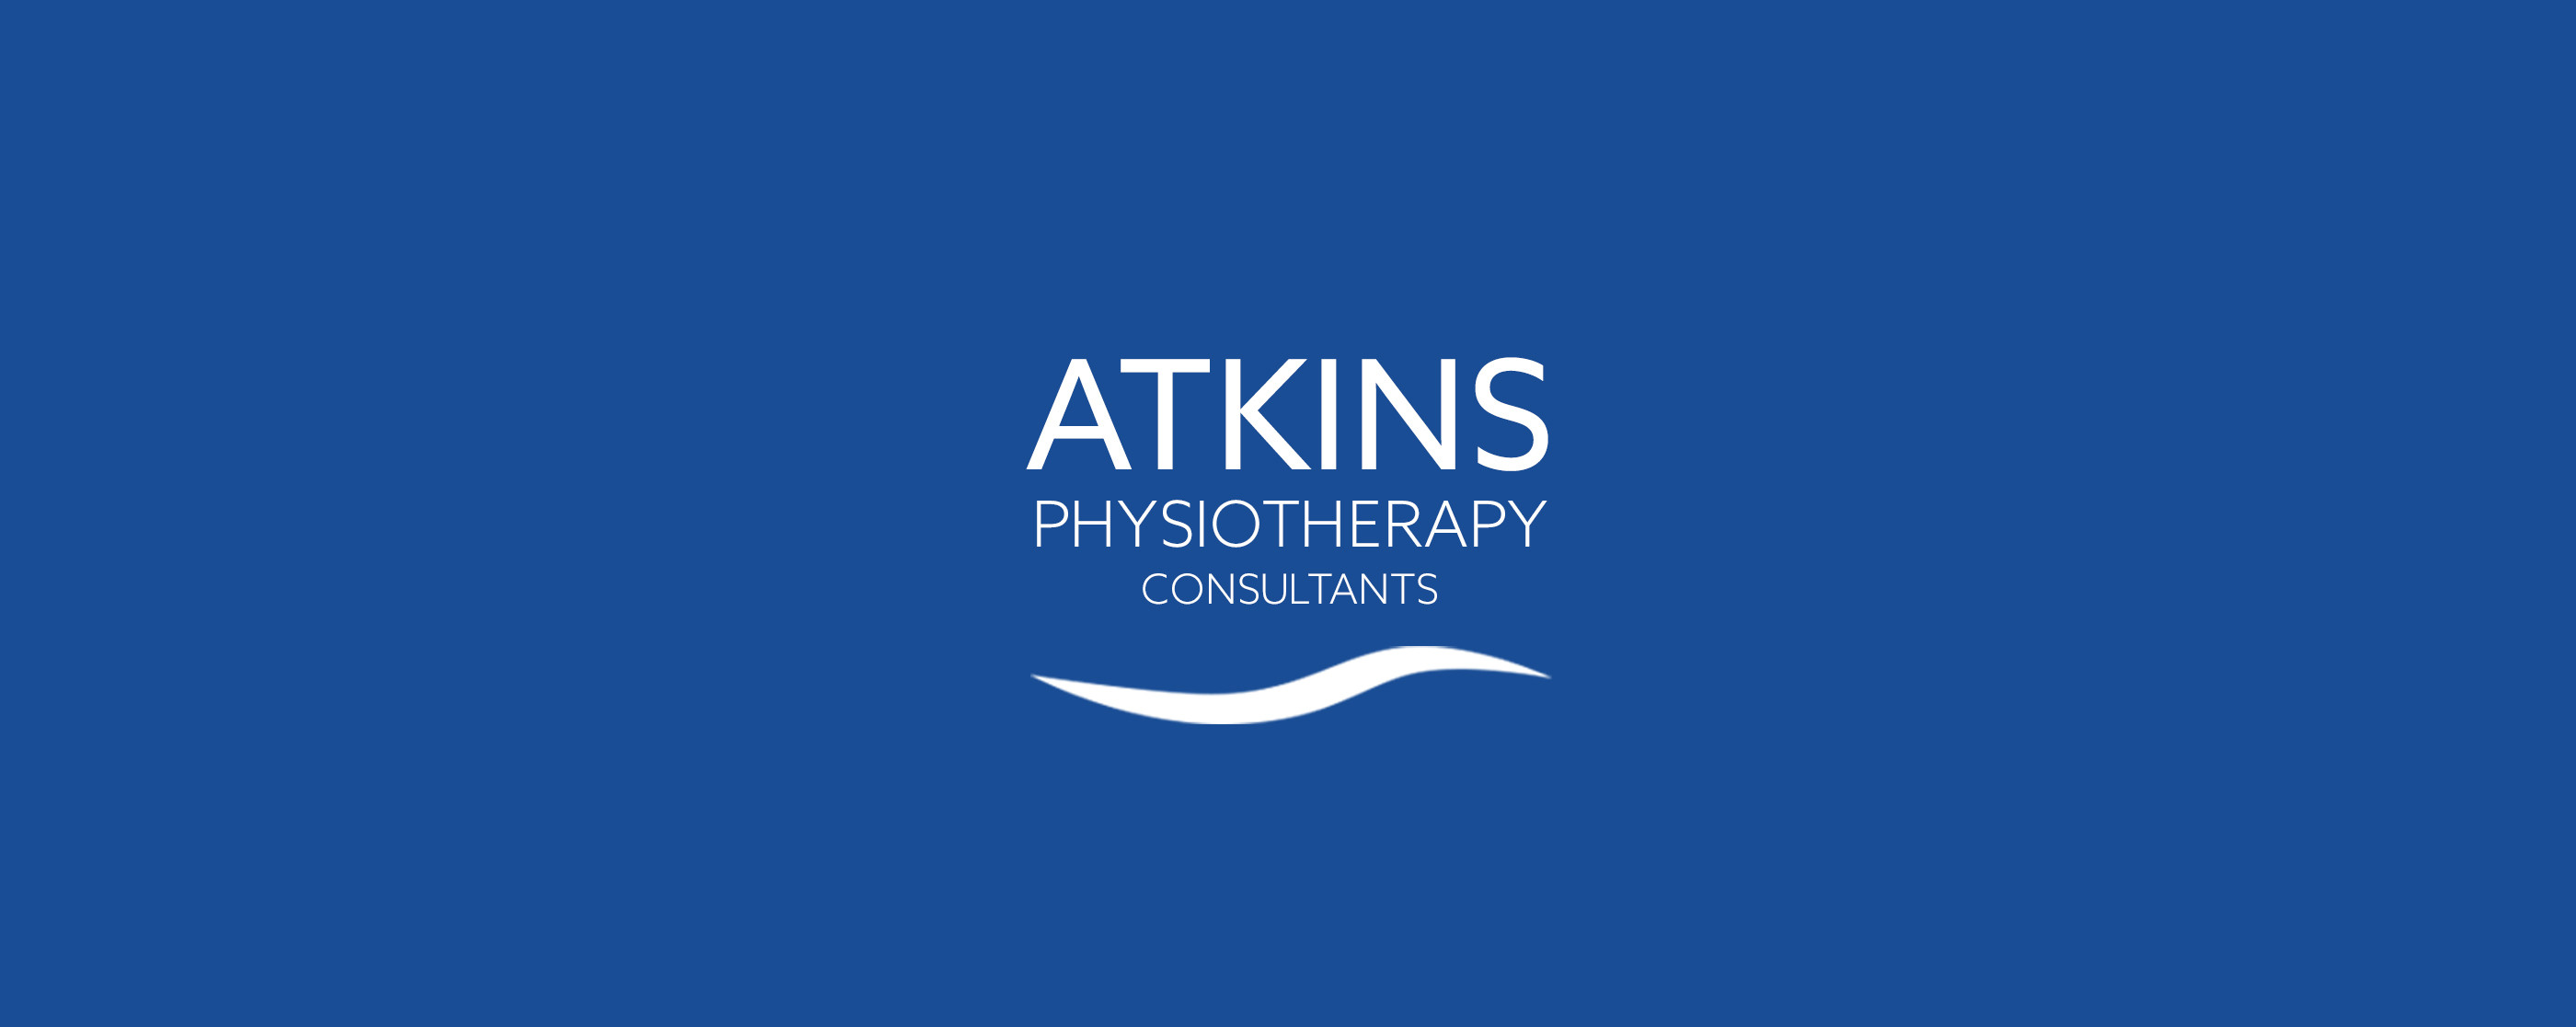 Atkins Physiotherapy